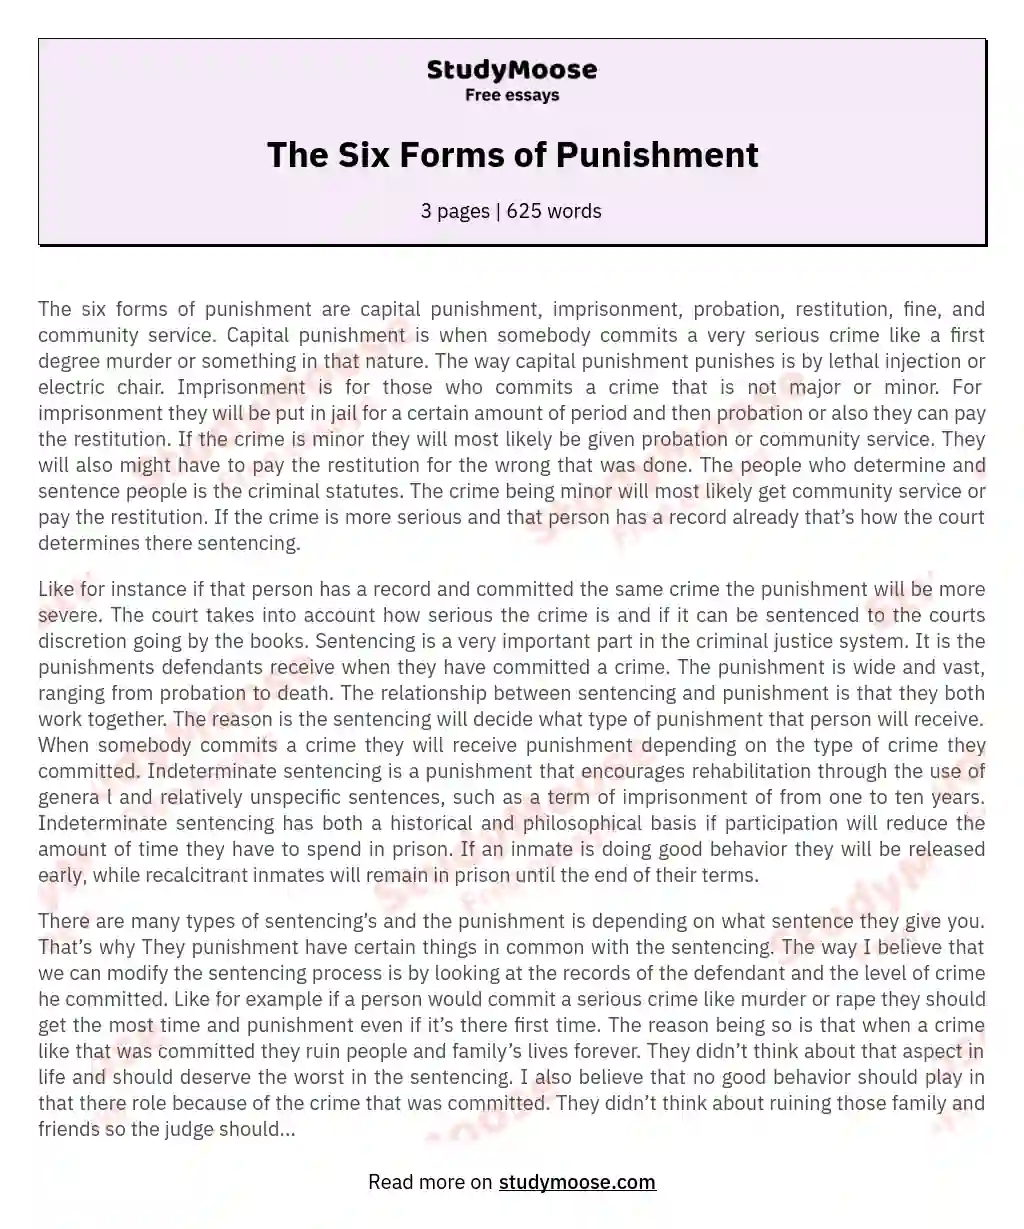 The Six Forms of Punishment essay